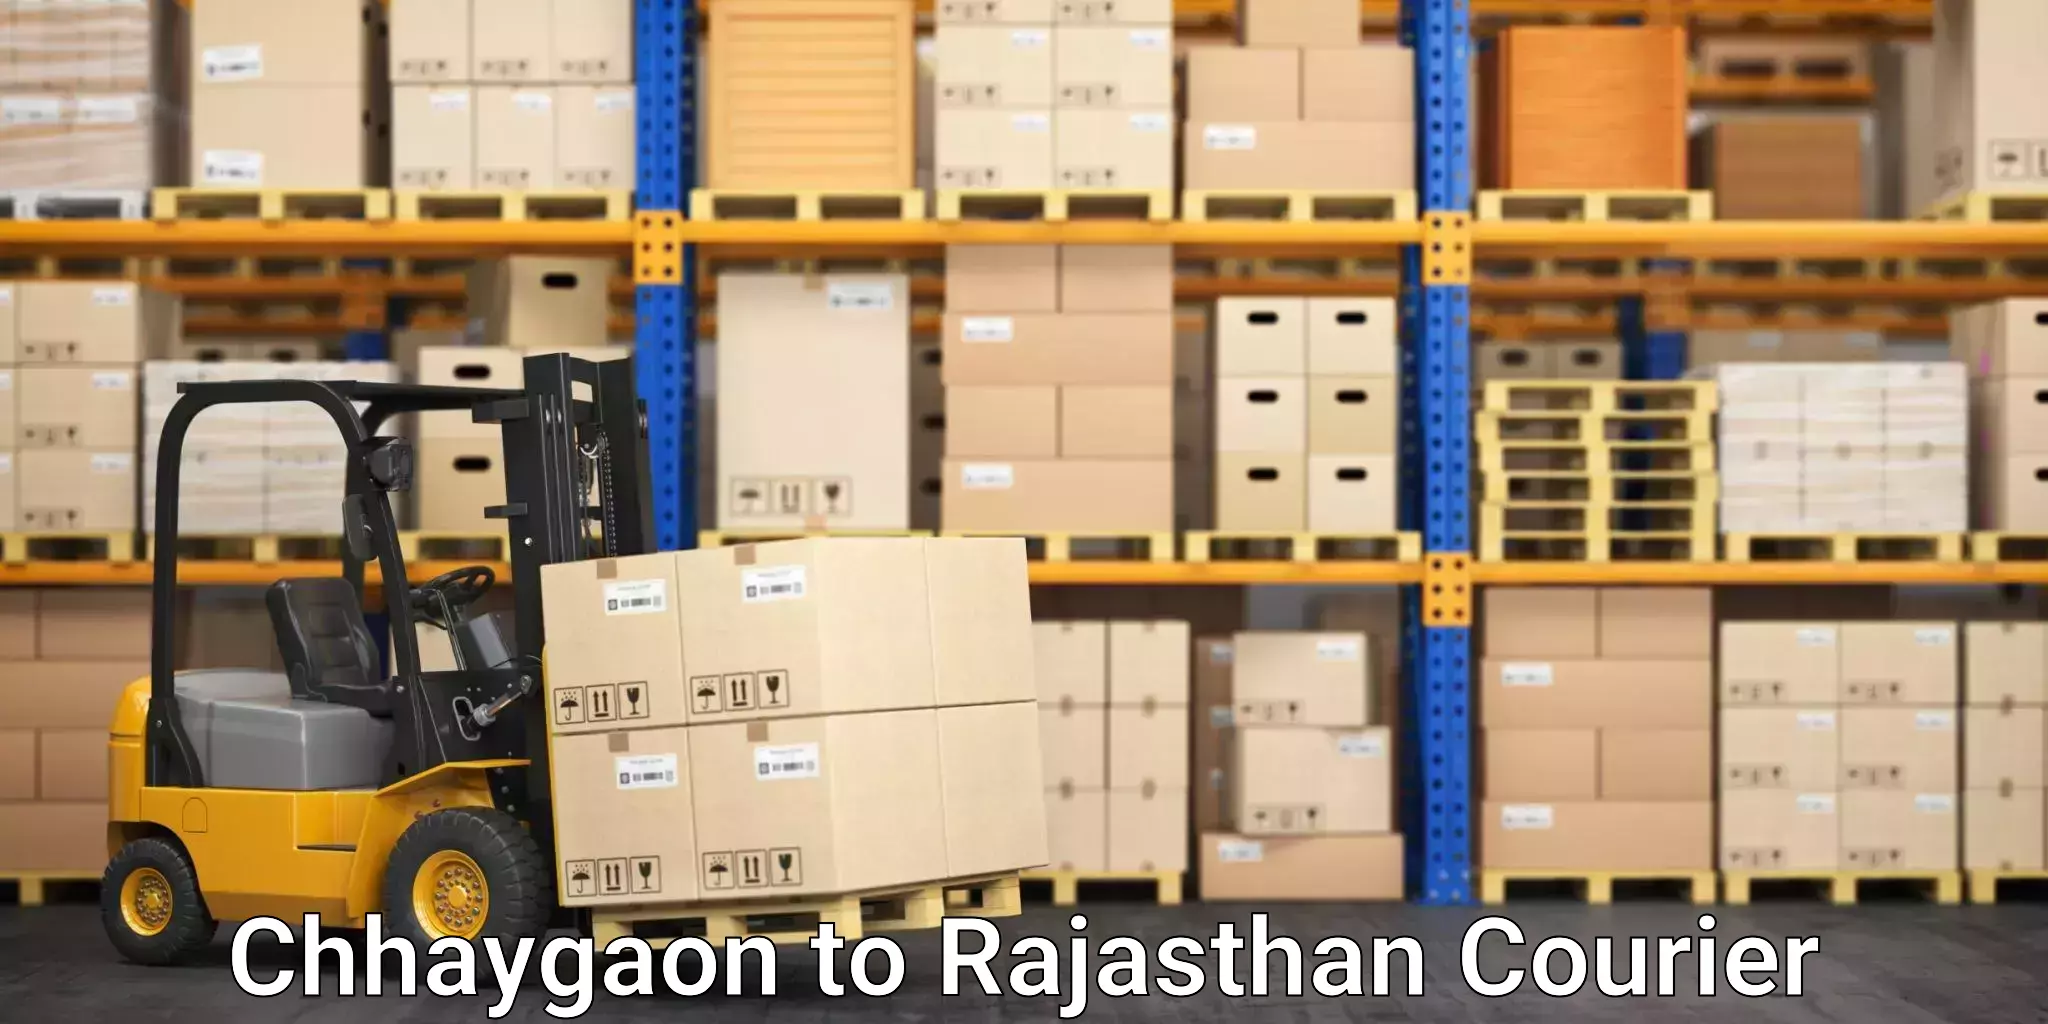 Cargo delivery service Chhaygaon to Nagaur